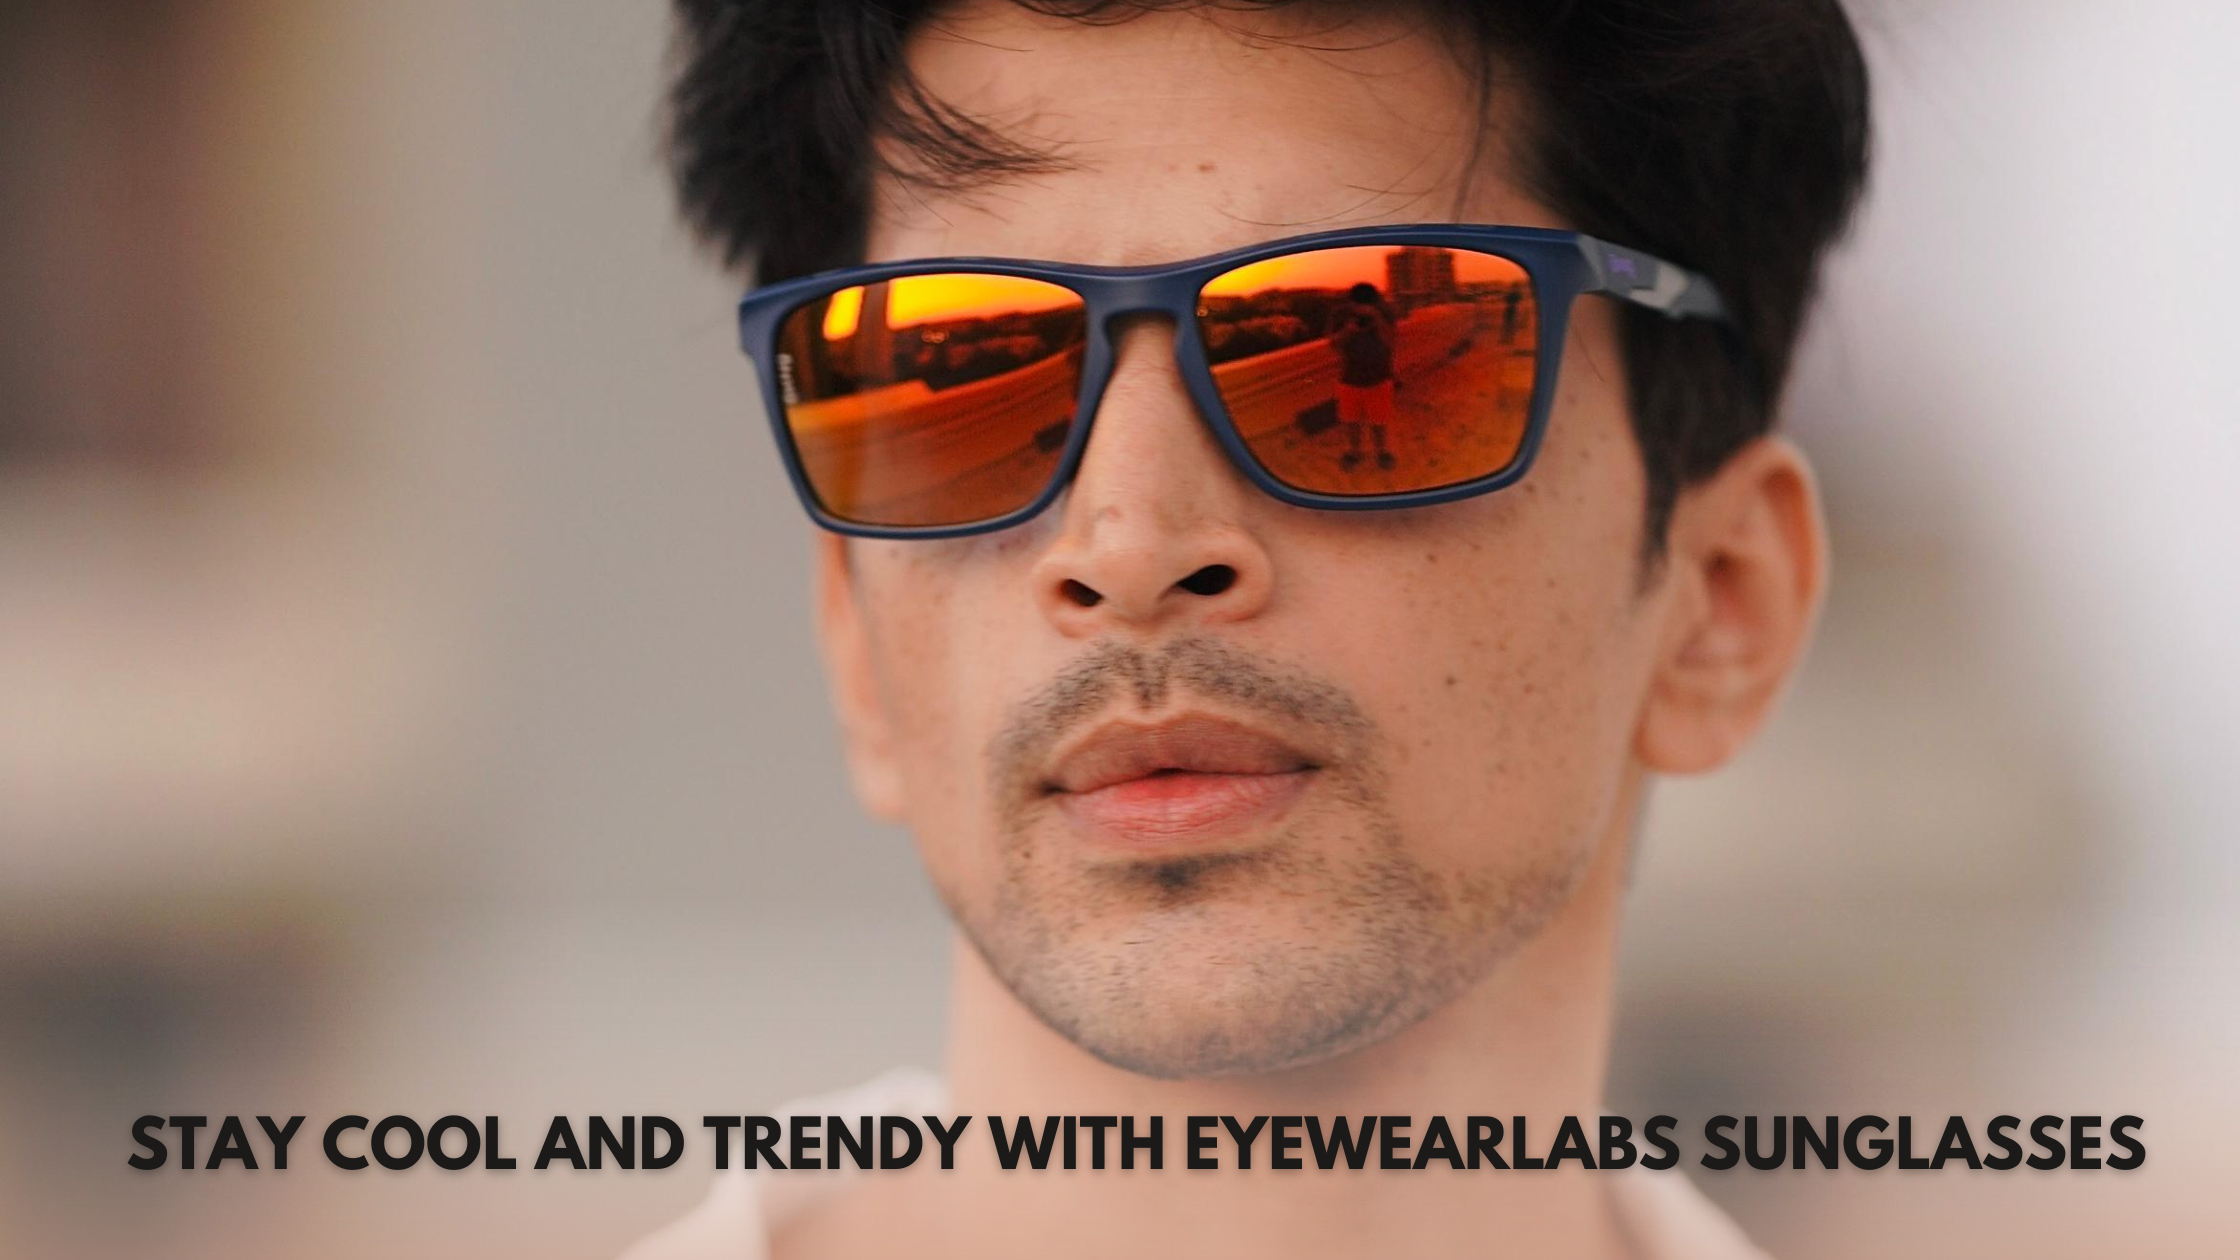 Stay Cool and Trendy with Eyewearlabs Sunglasses